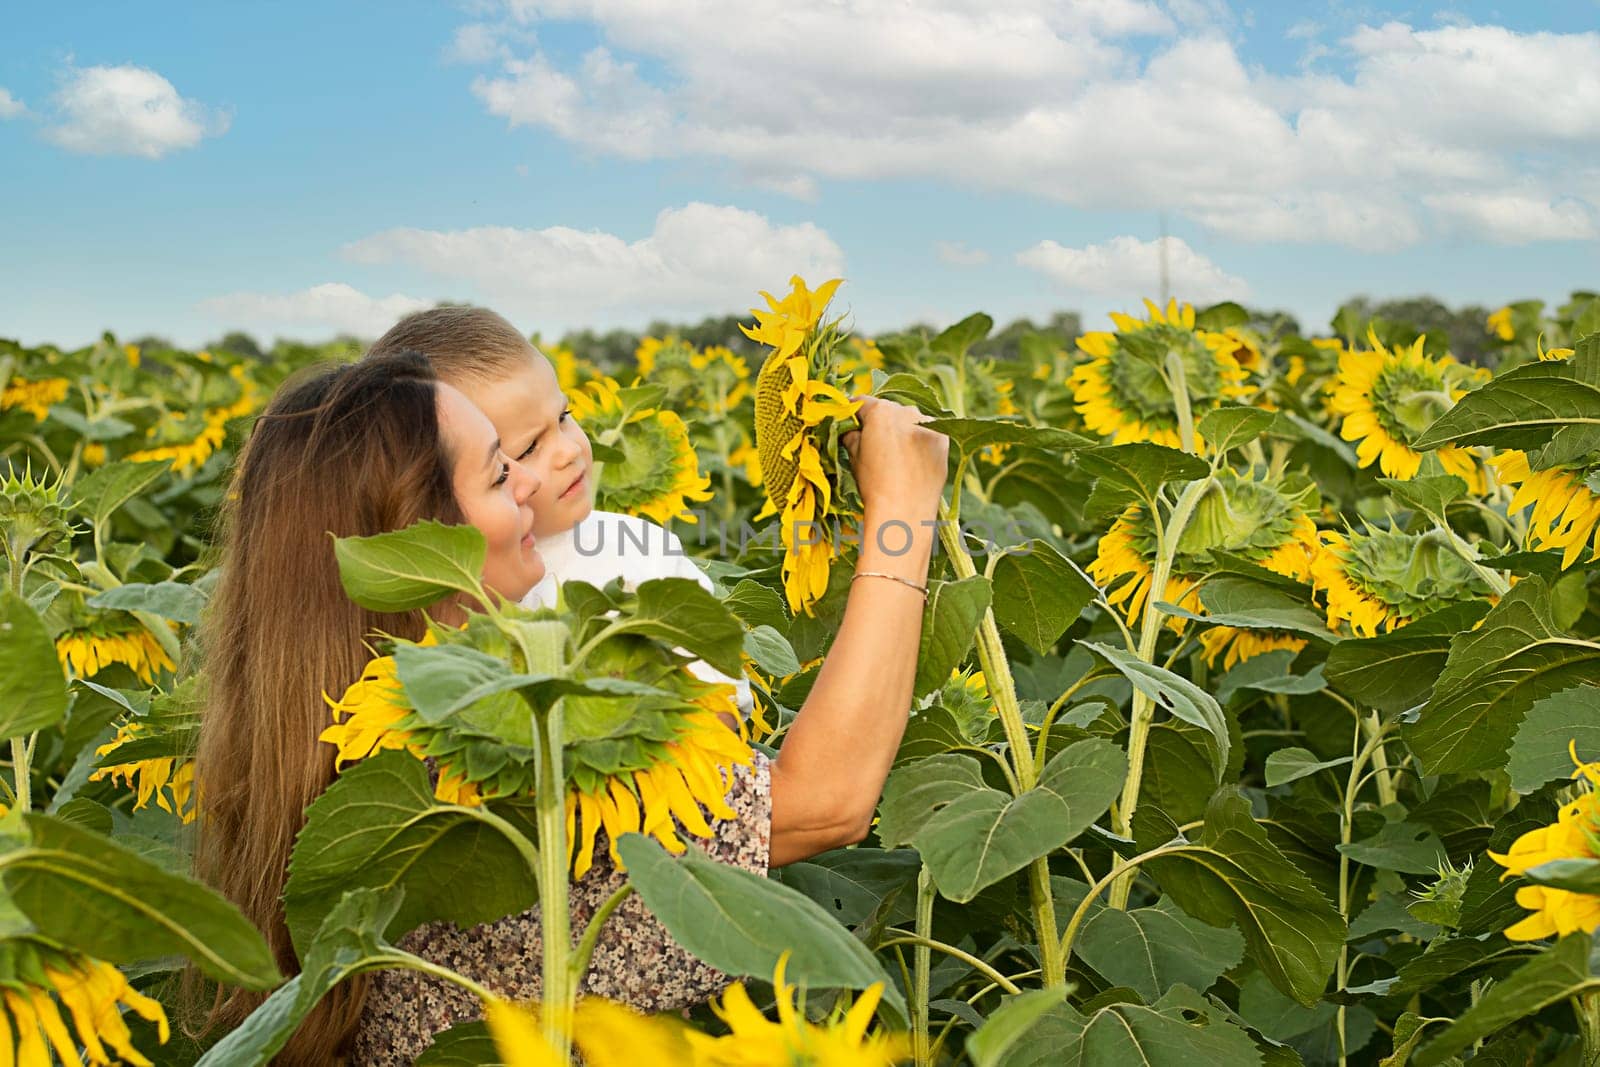 Family concept. A little boy in his mother's arms, gently hugs while standing in a field with yellow sunflowers against the blue sky. A symbol of peace. Symbol of Ukraine. by ketlit